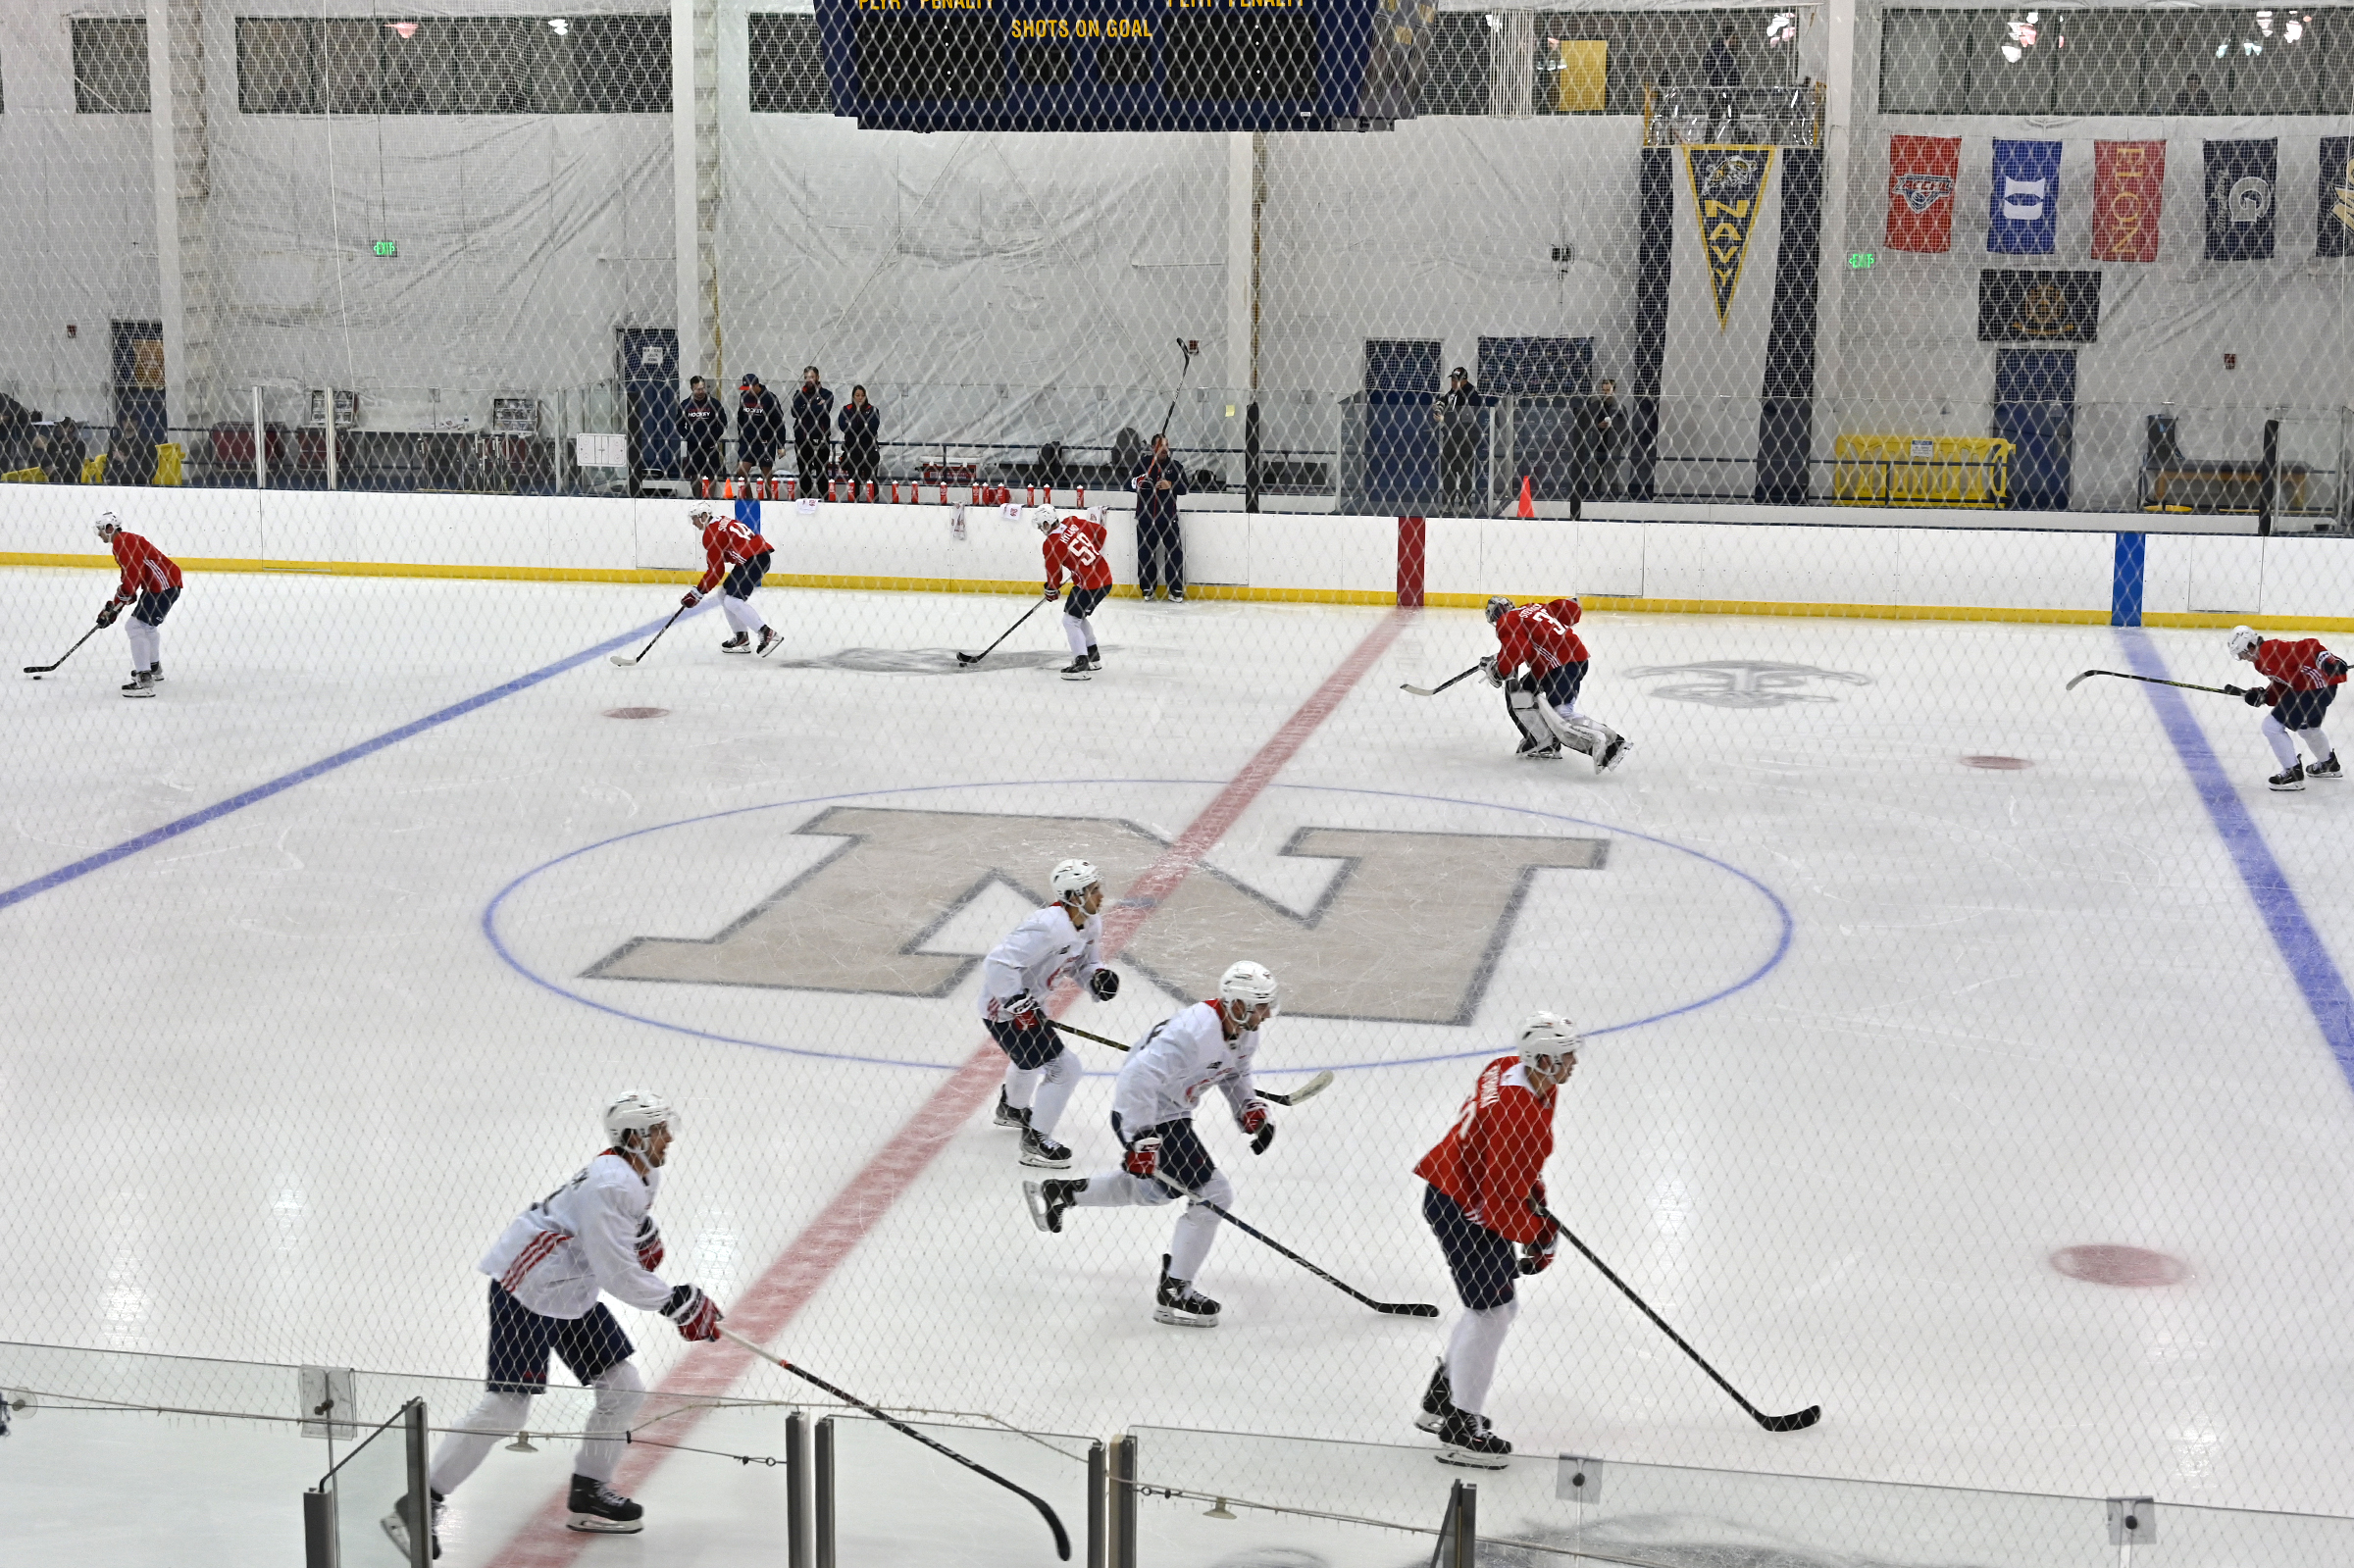 Capitals Rookie Camp at the US Naval Academy in photos